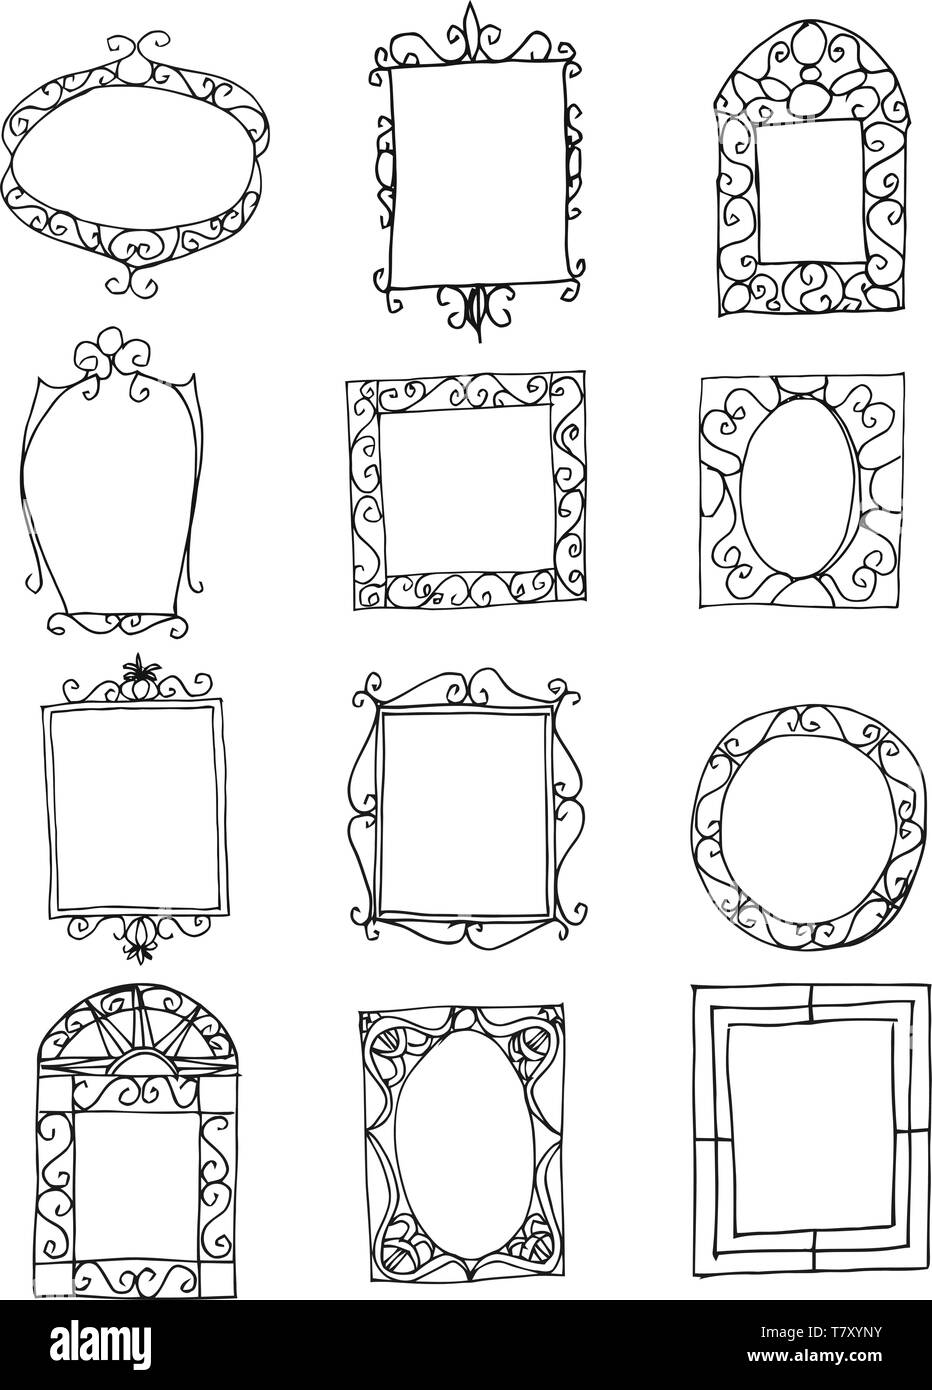 Rustic picture frames Stock Vector Images - Alamy